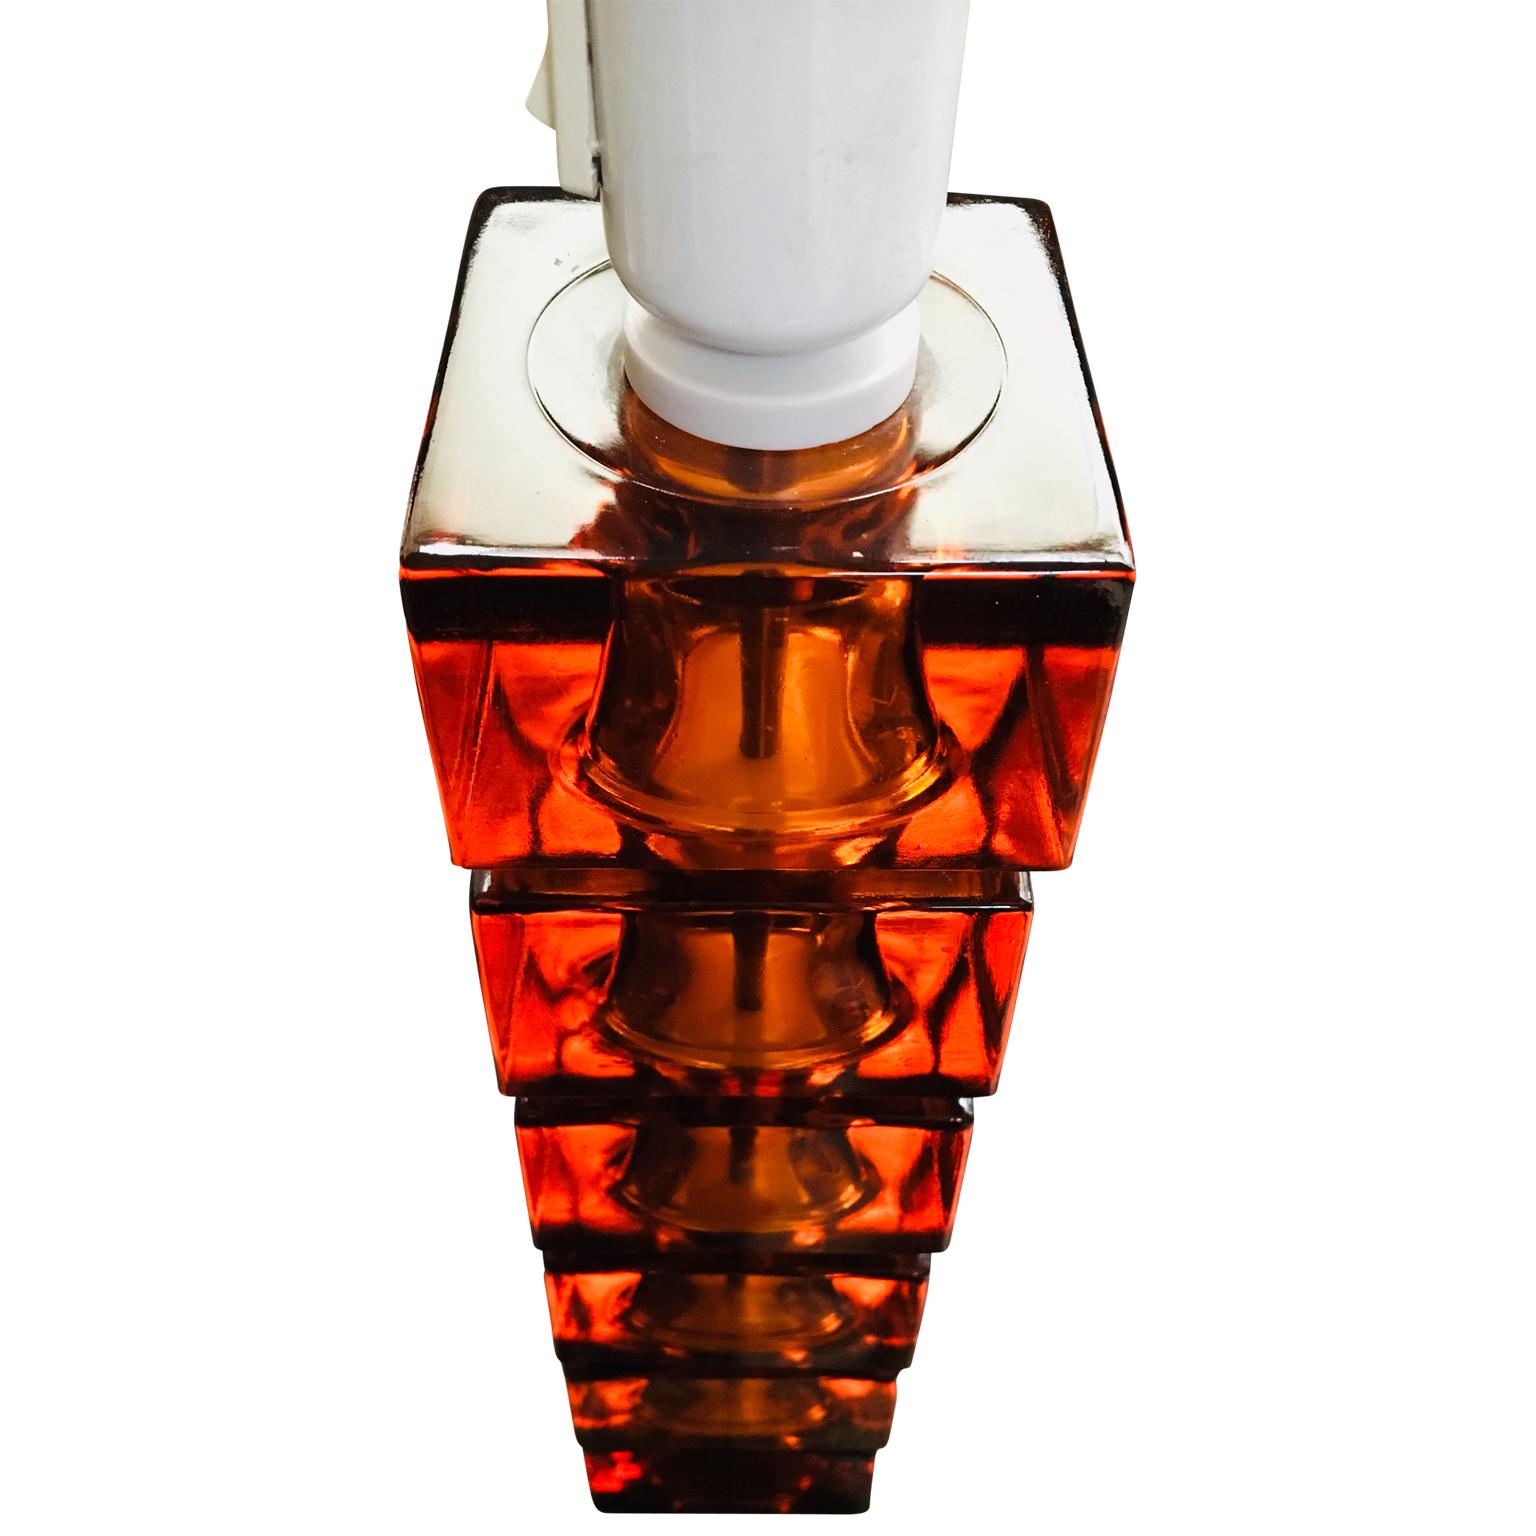 Mid-century Italian amber colored glass cube table lamp

The six glass cubes are separated by thick brass discs

Please note that this lamp is wired for European network.
For US clients, I offer to have the lamp wired standard before delivery at no